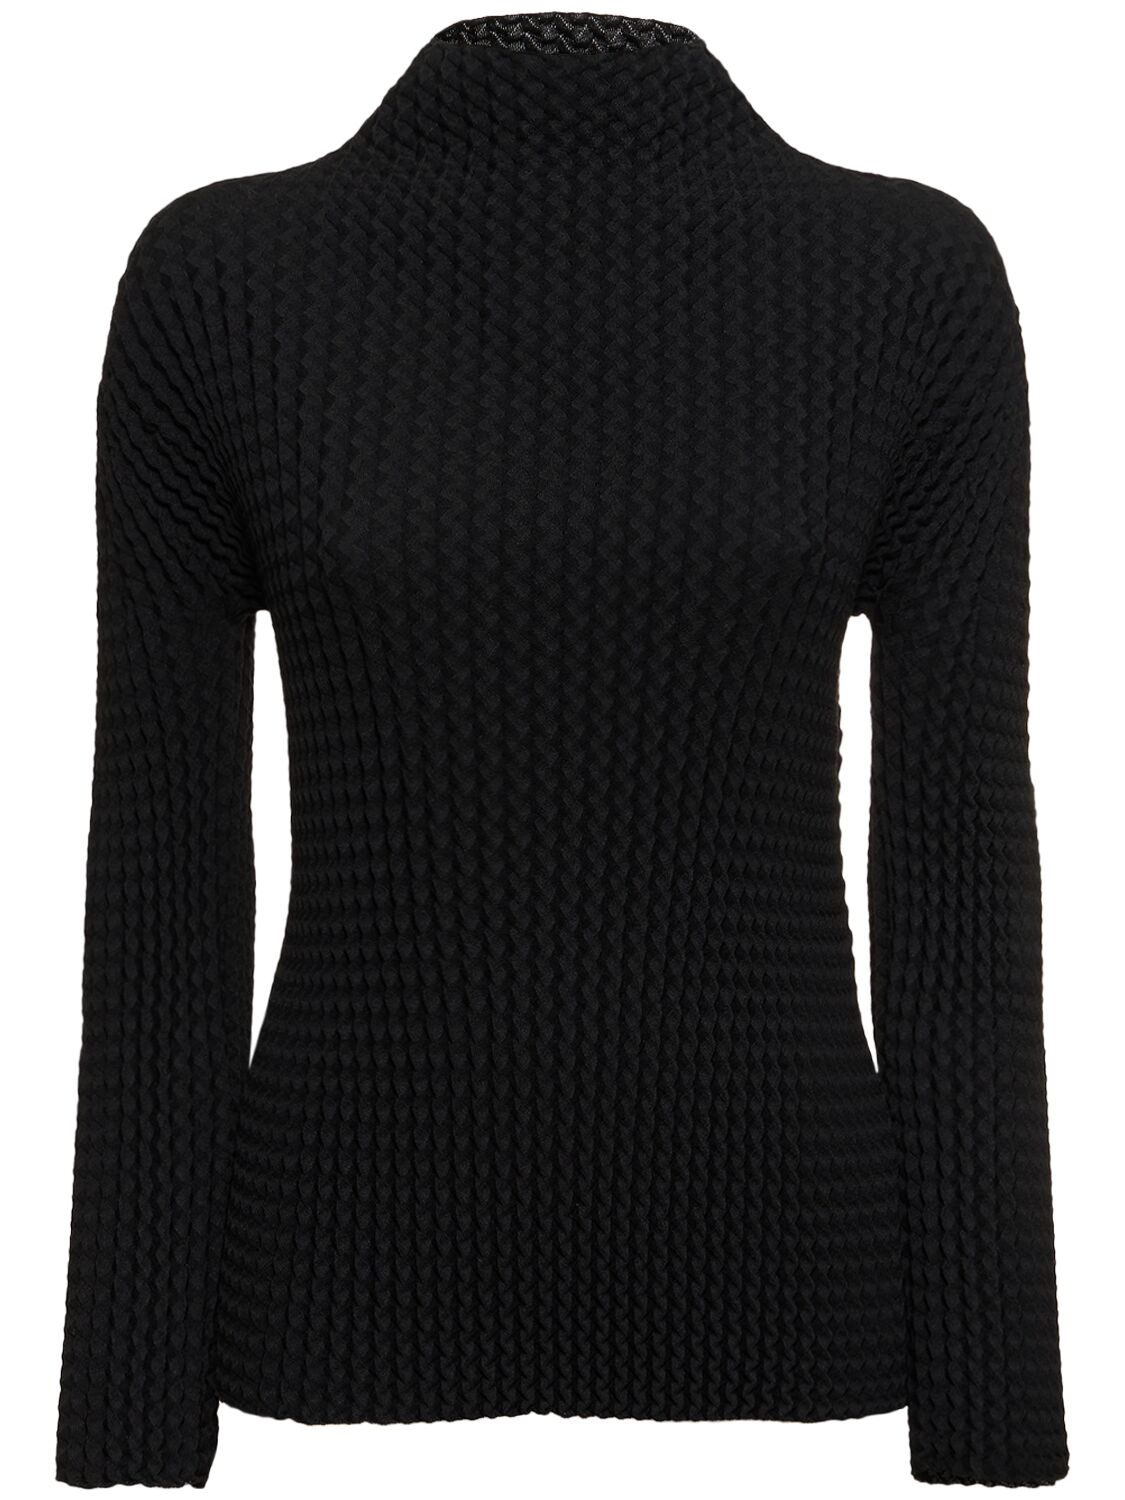 ISSEY MIYAKE SPONGY JERSEY LONG SLEEVE TOP